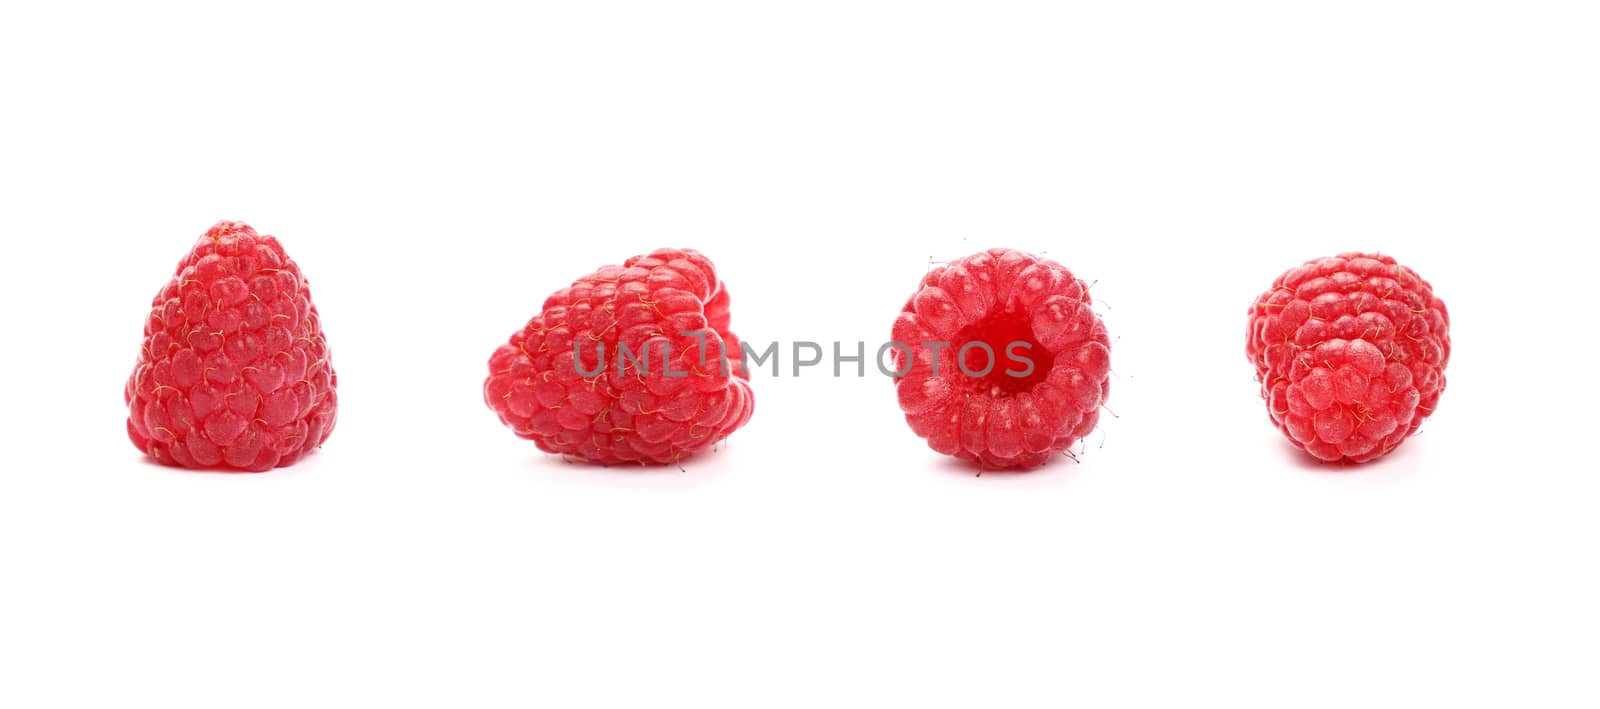 Four fresh red ripe mellow raspberry berries isolated on white background, detail close up in different perspectives, low angle view